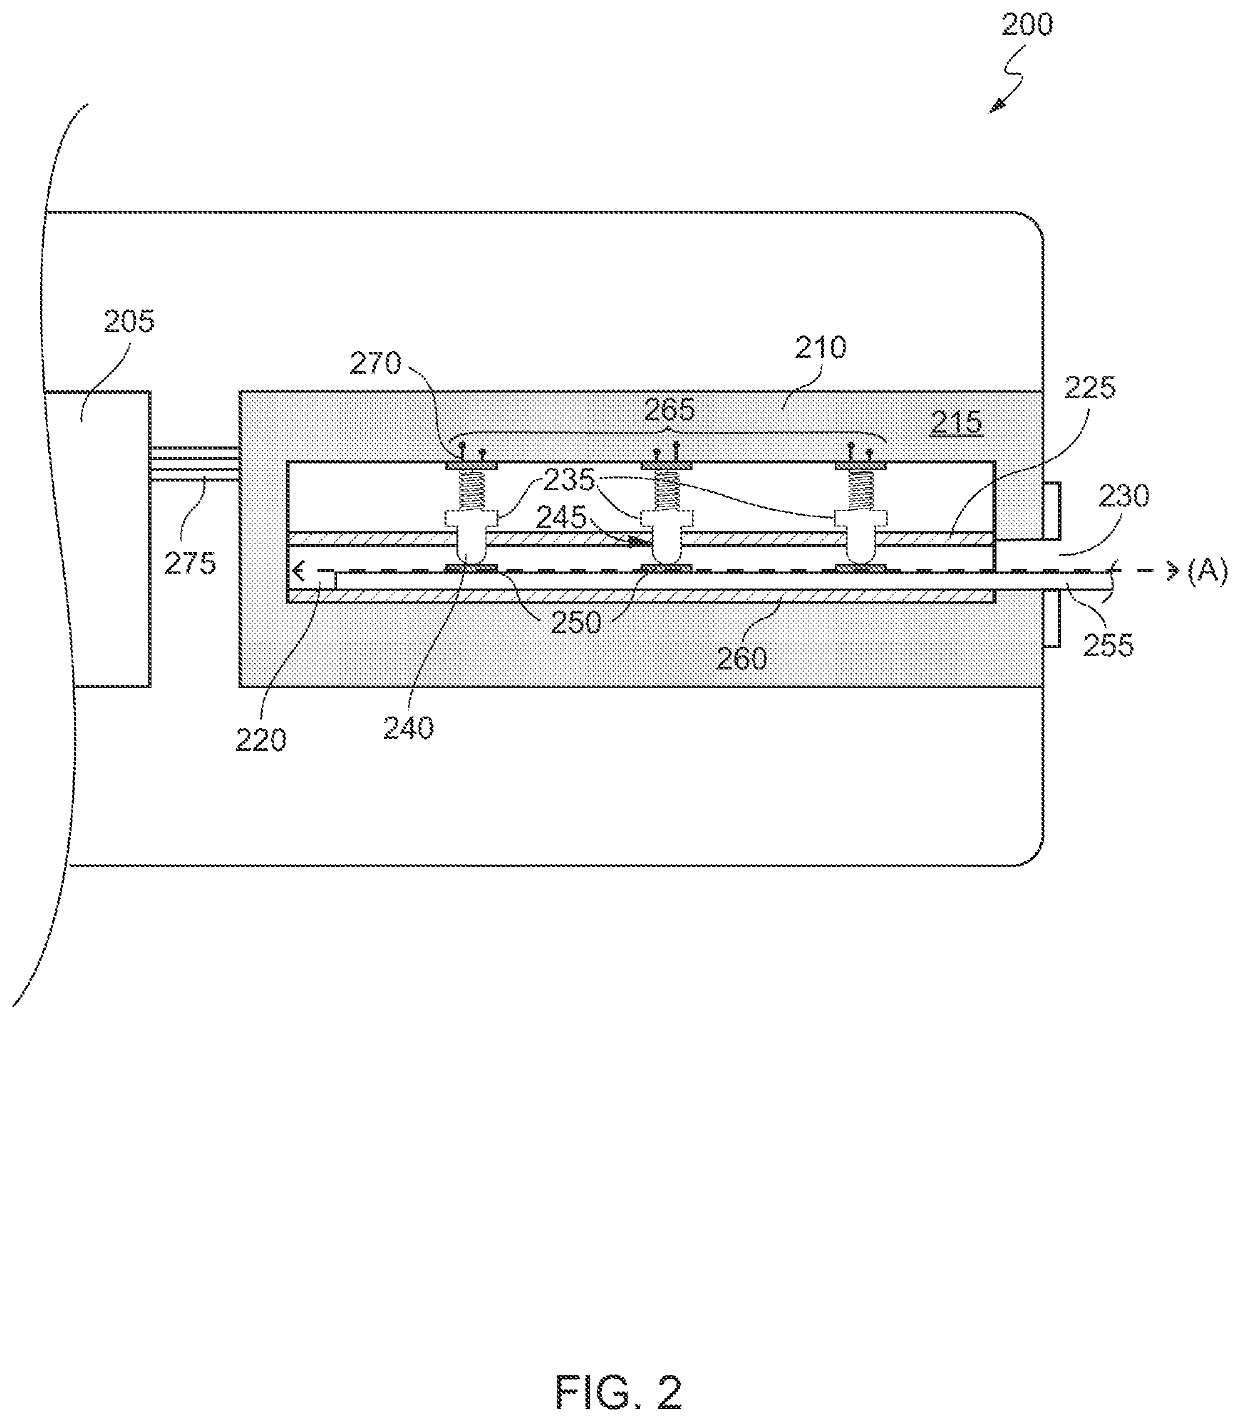 Separable High Density Connectors For Implantable Device